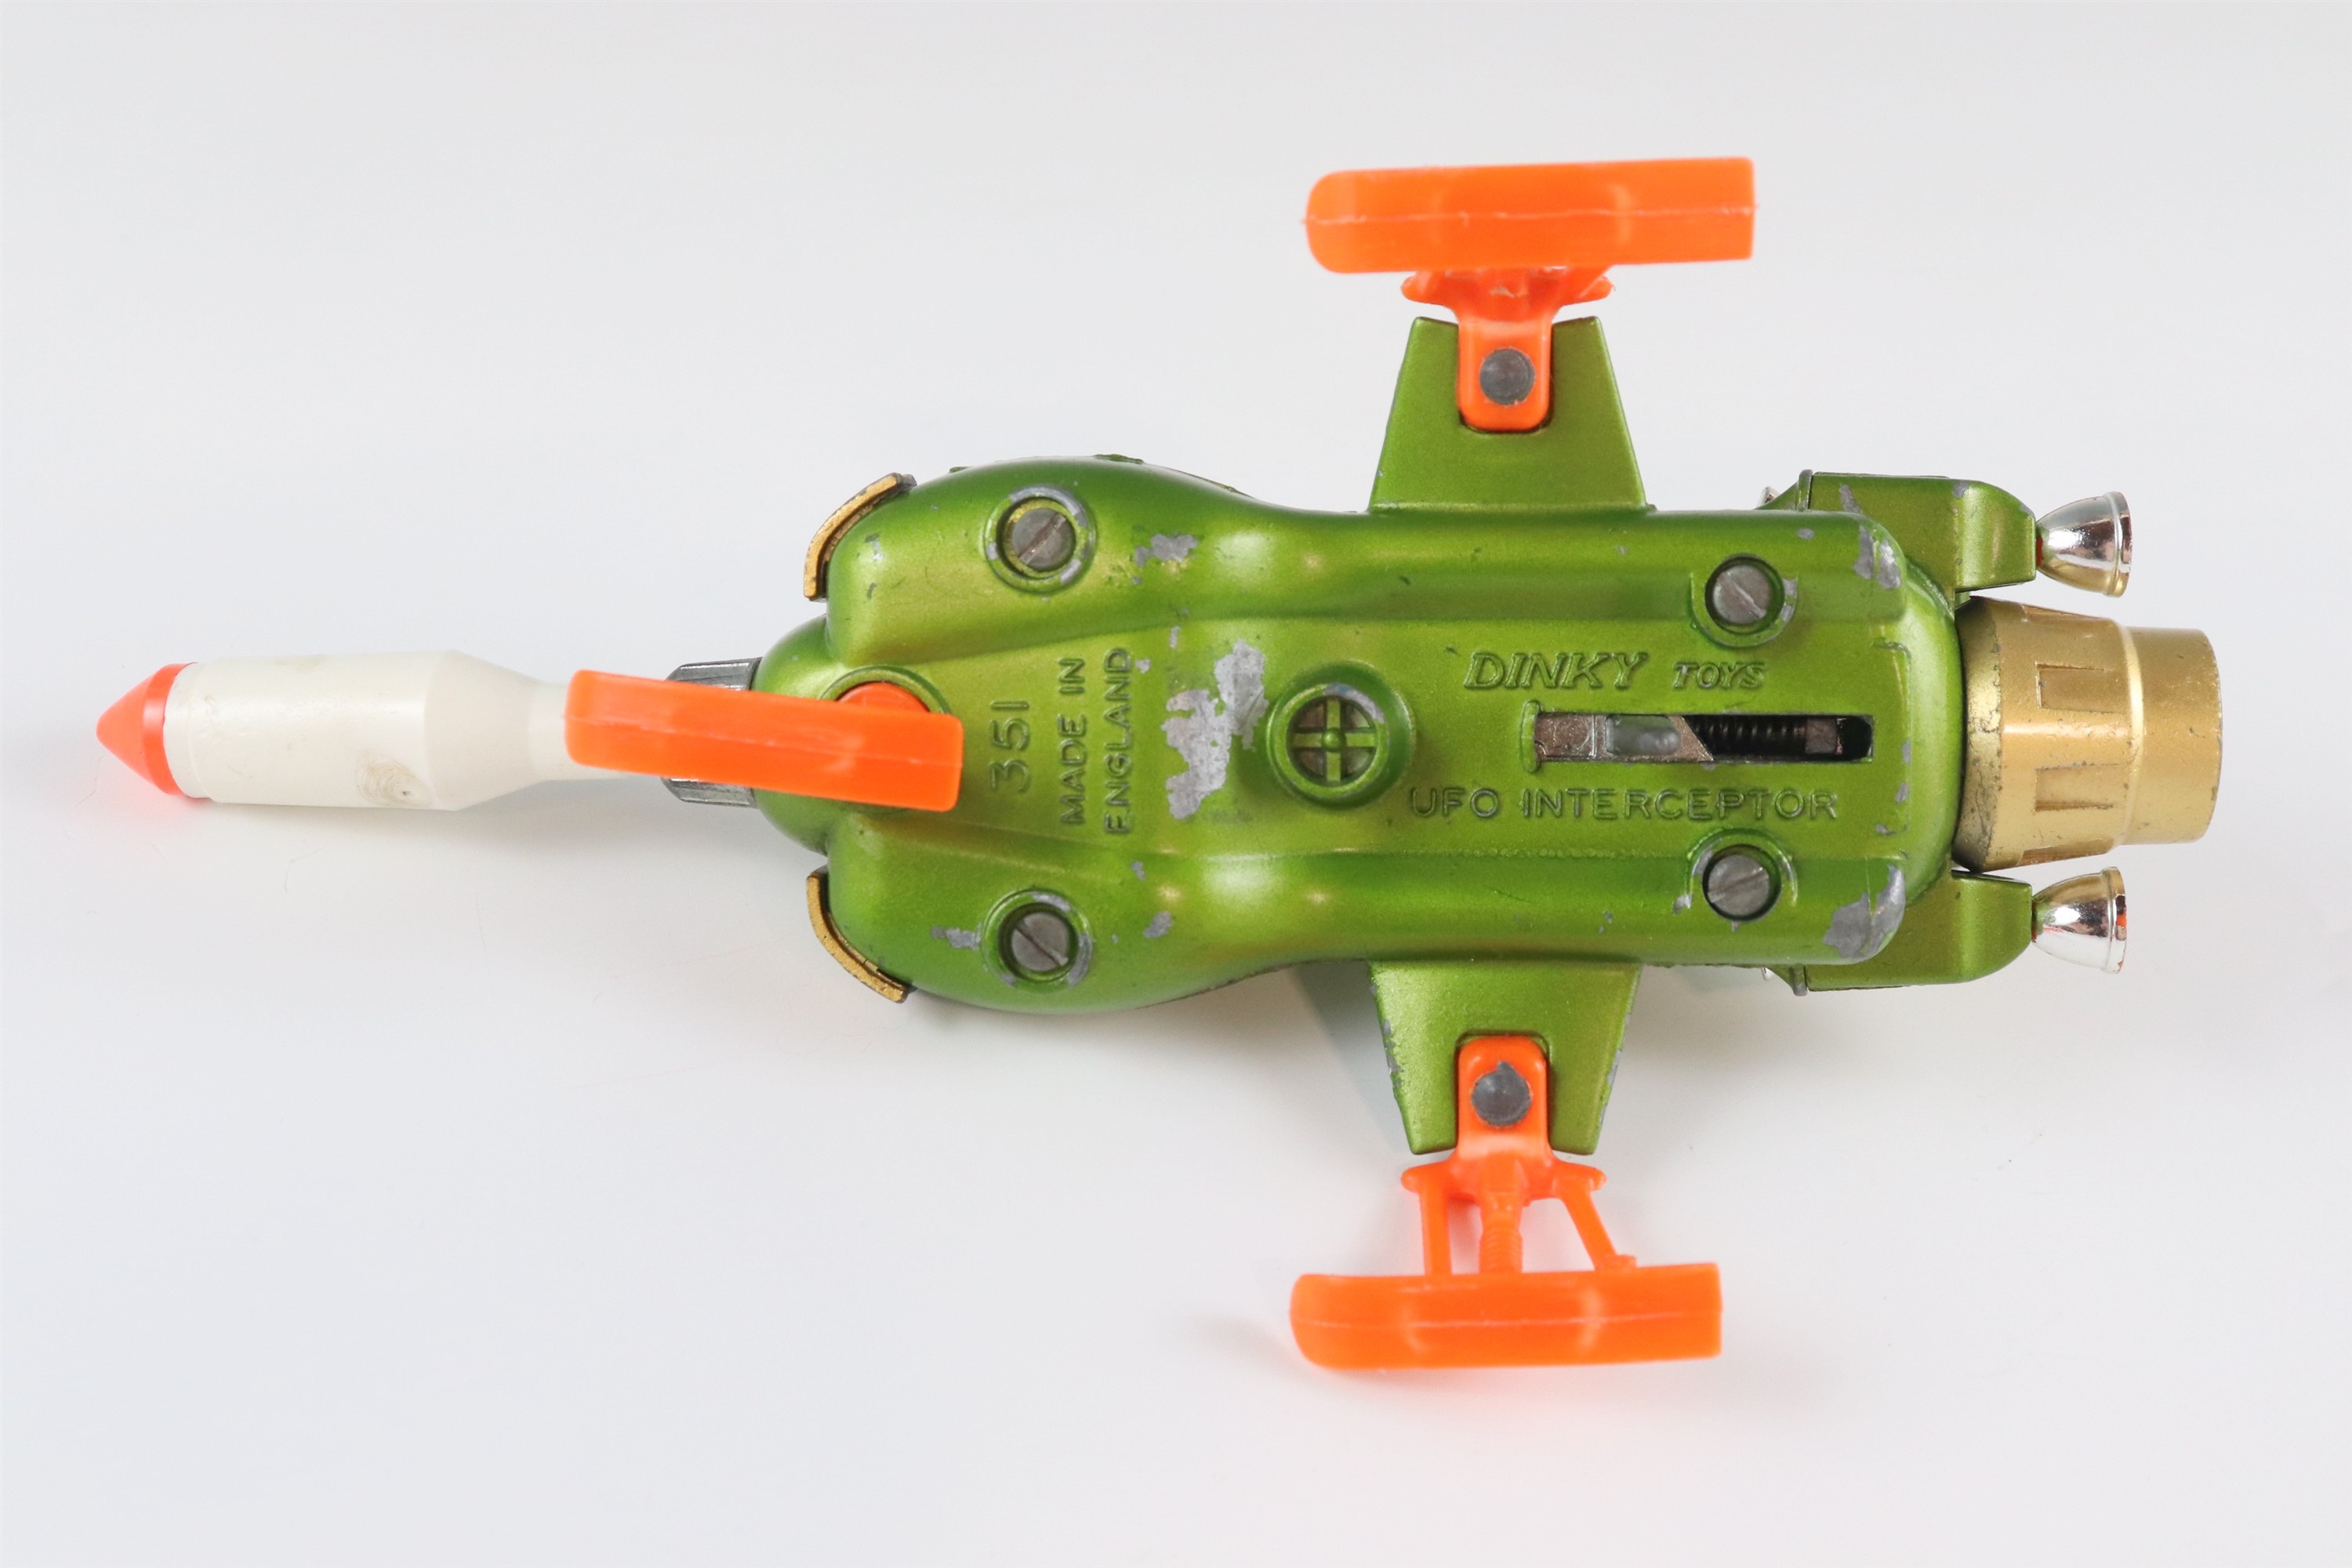 A Dinky diecast UFO Interceptor 351, spring loaded firing action, 14 x 8 cm excluding projectile [ - Image 3 of 3